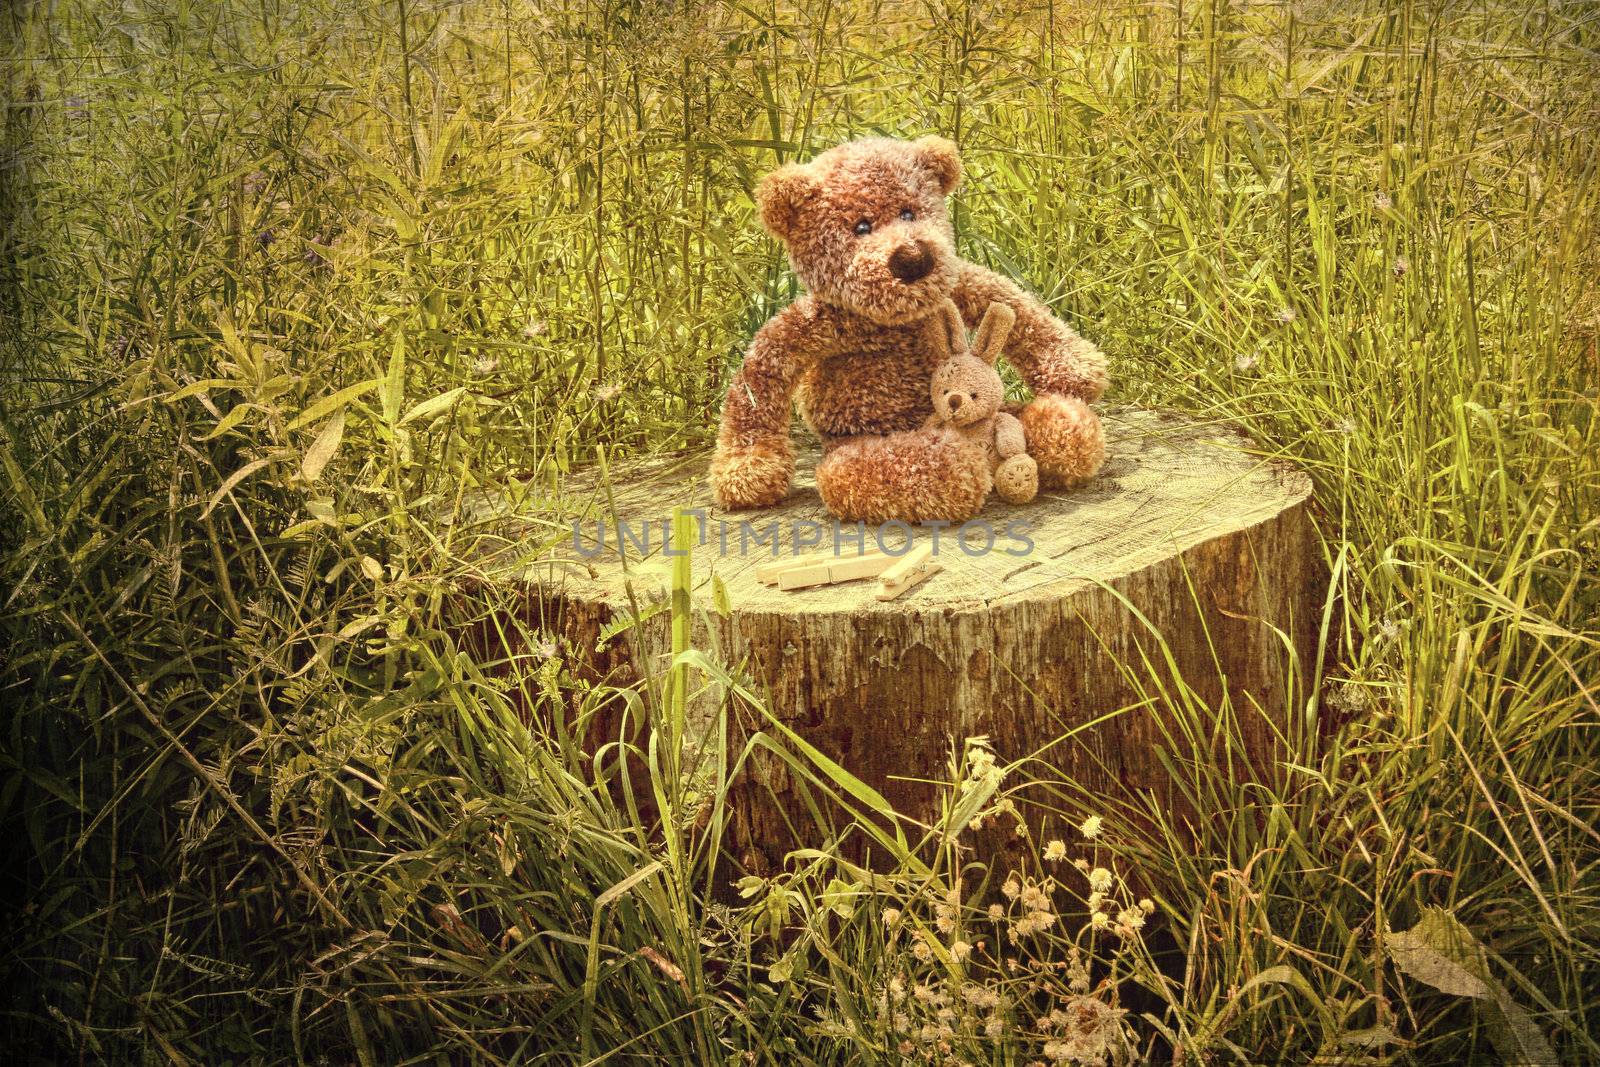 Small little bears on old wooden stump in grass by Sandralise